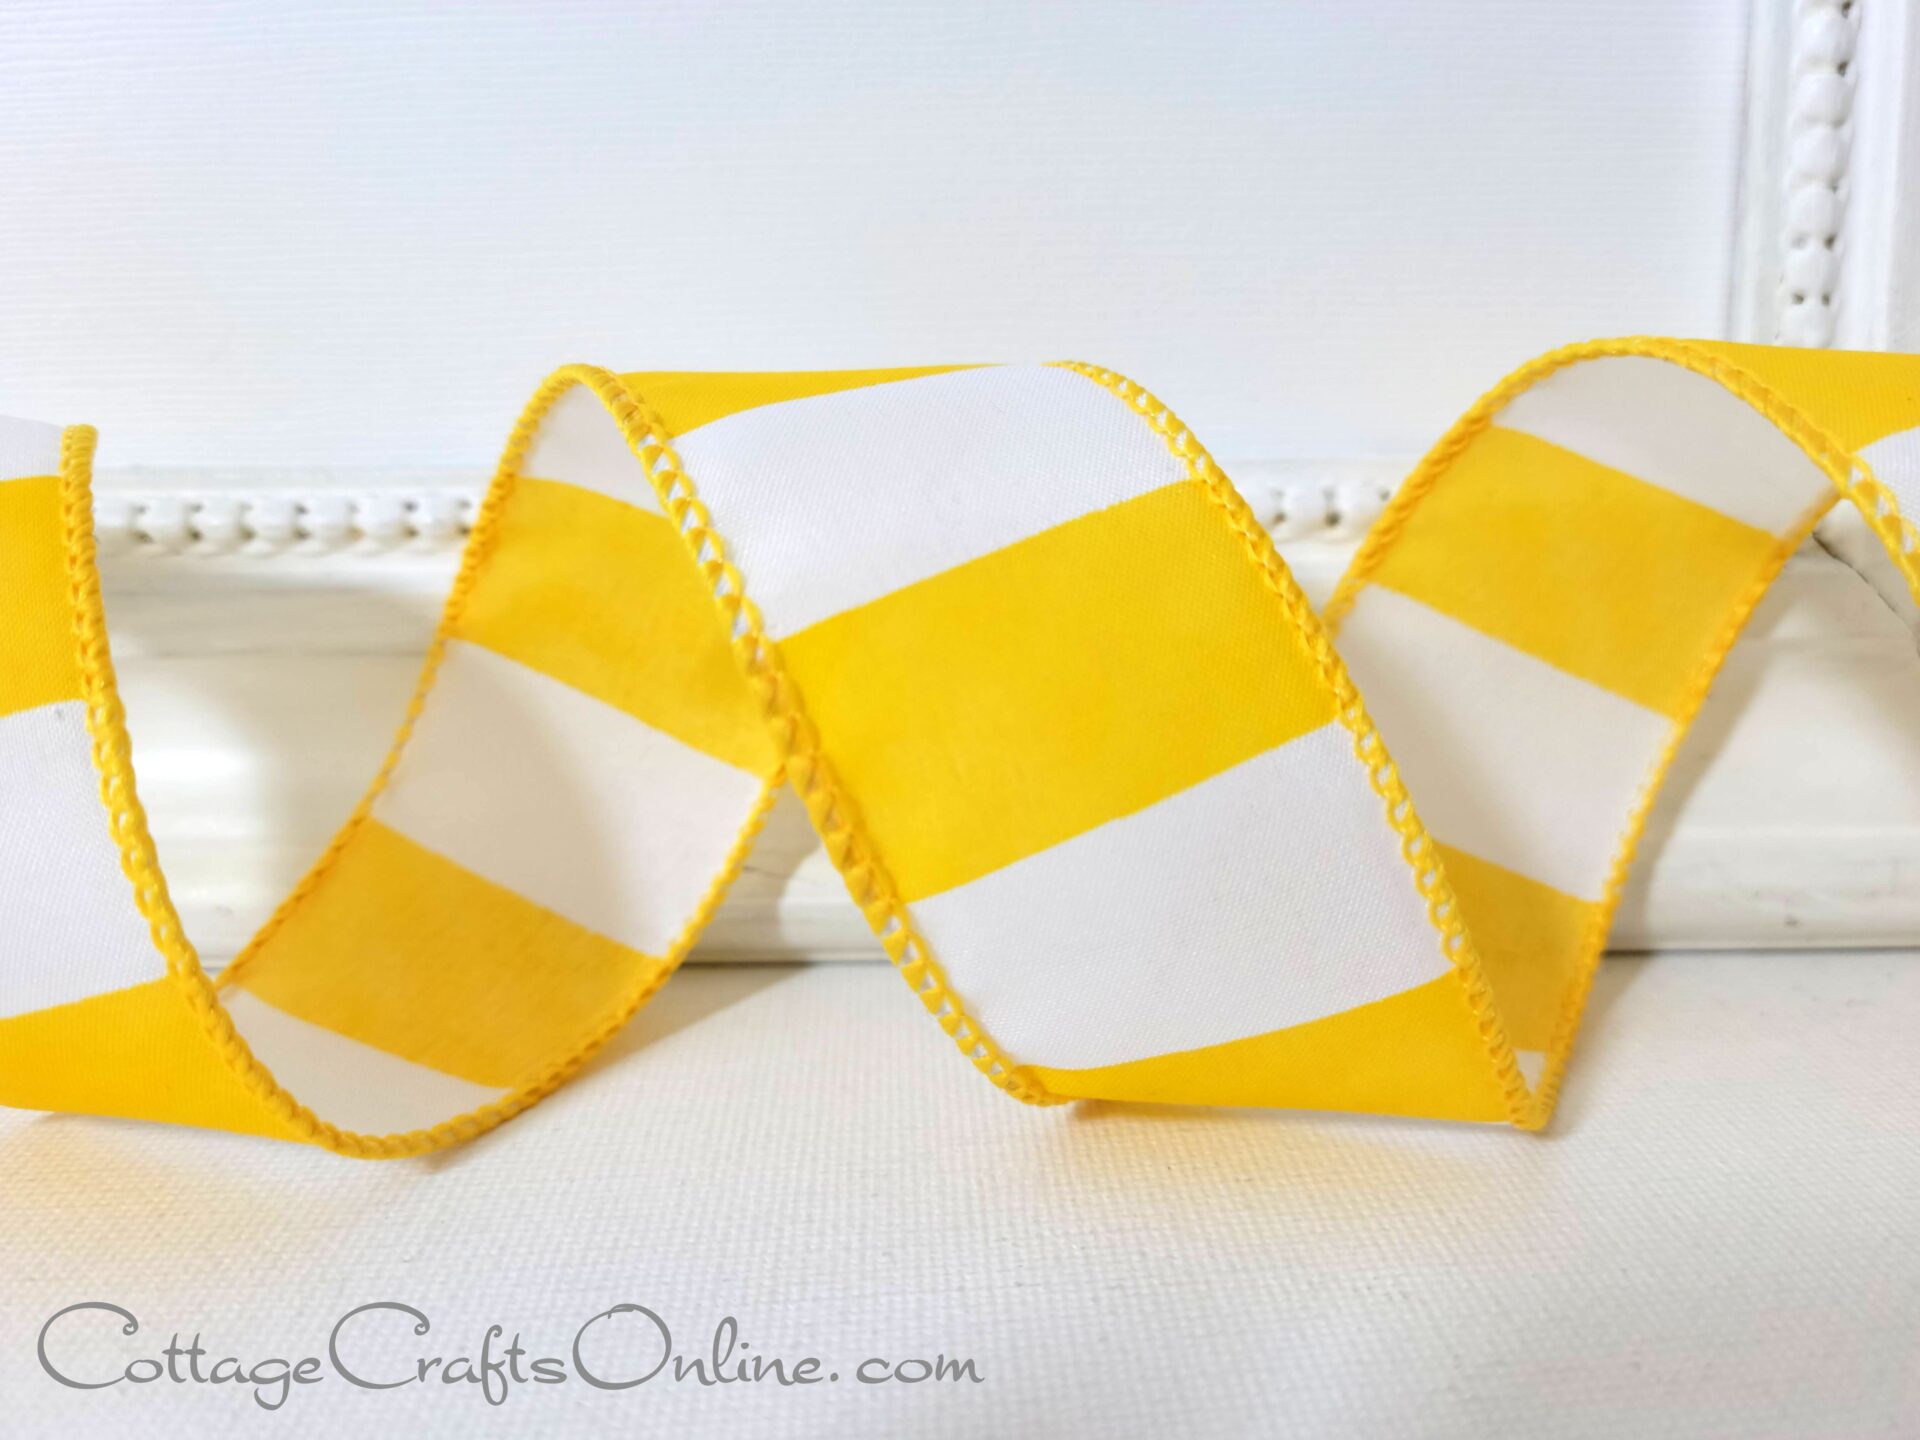 THREE YARDS Wired Ribbon - Wide Yellow and White